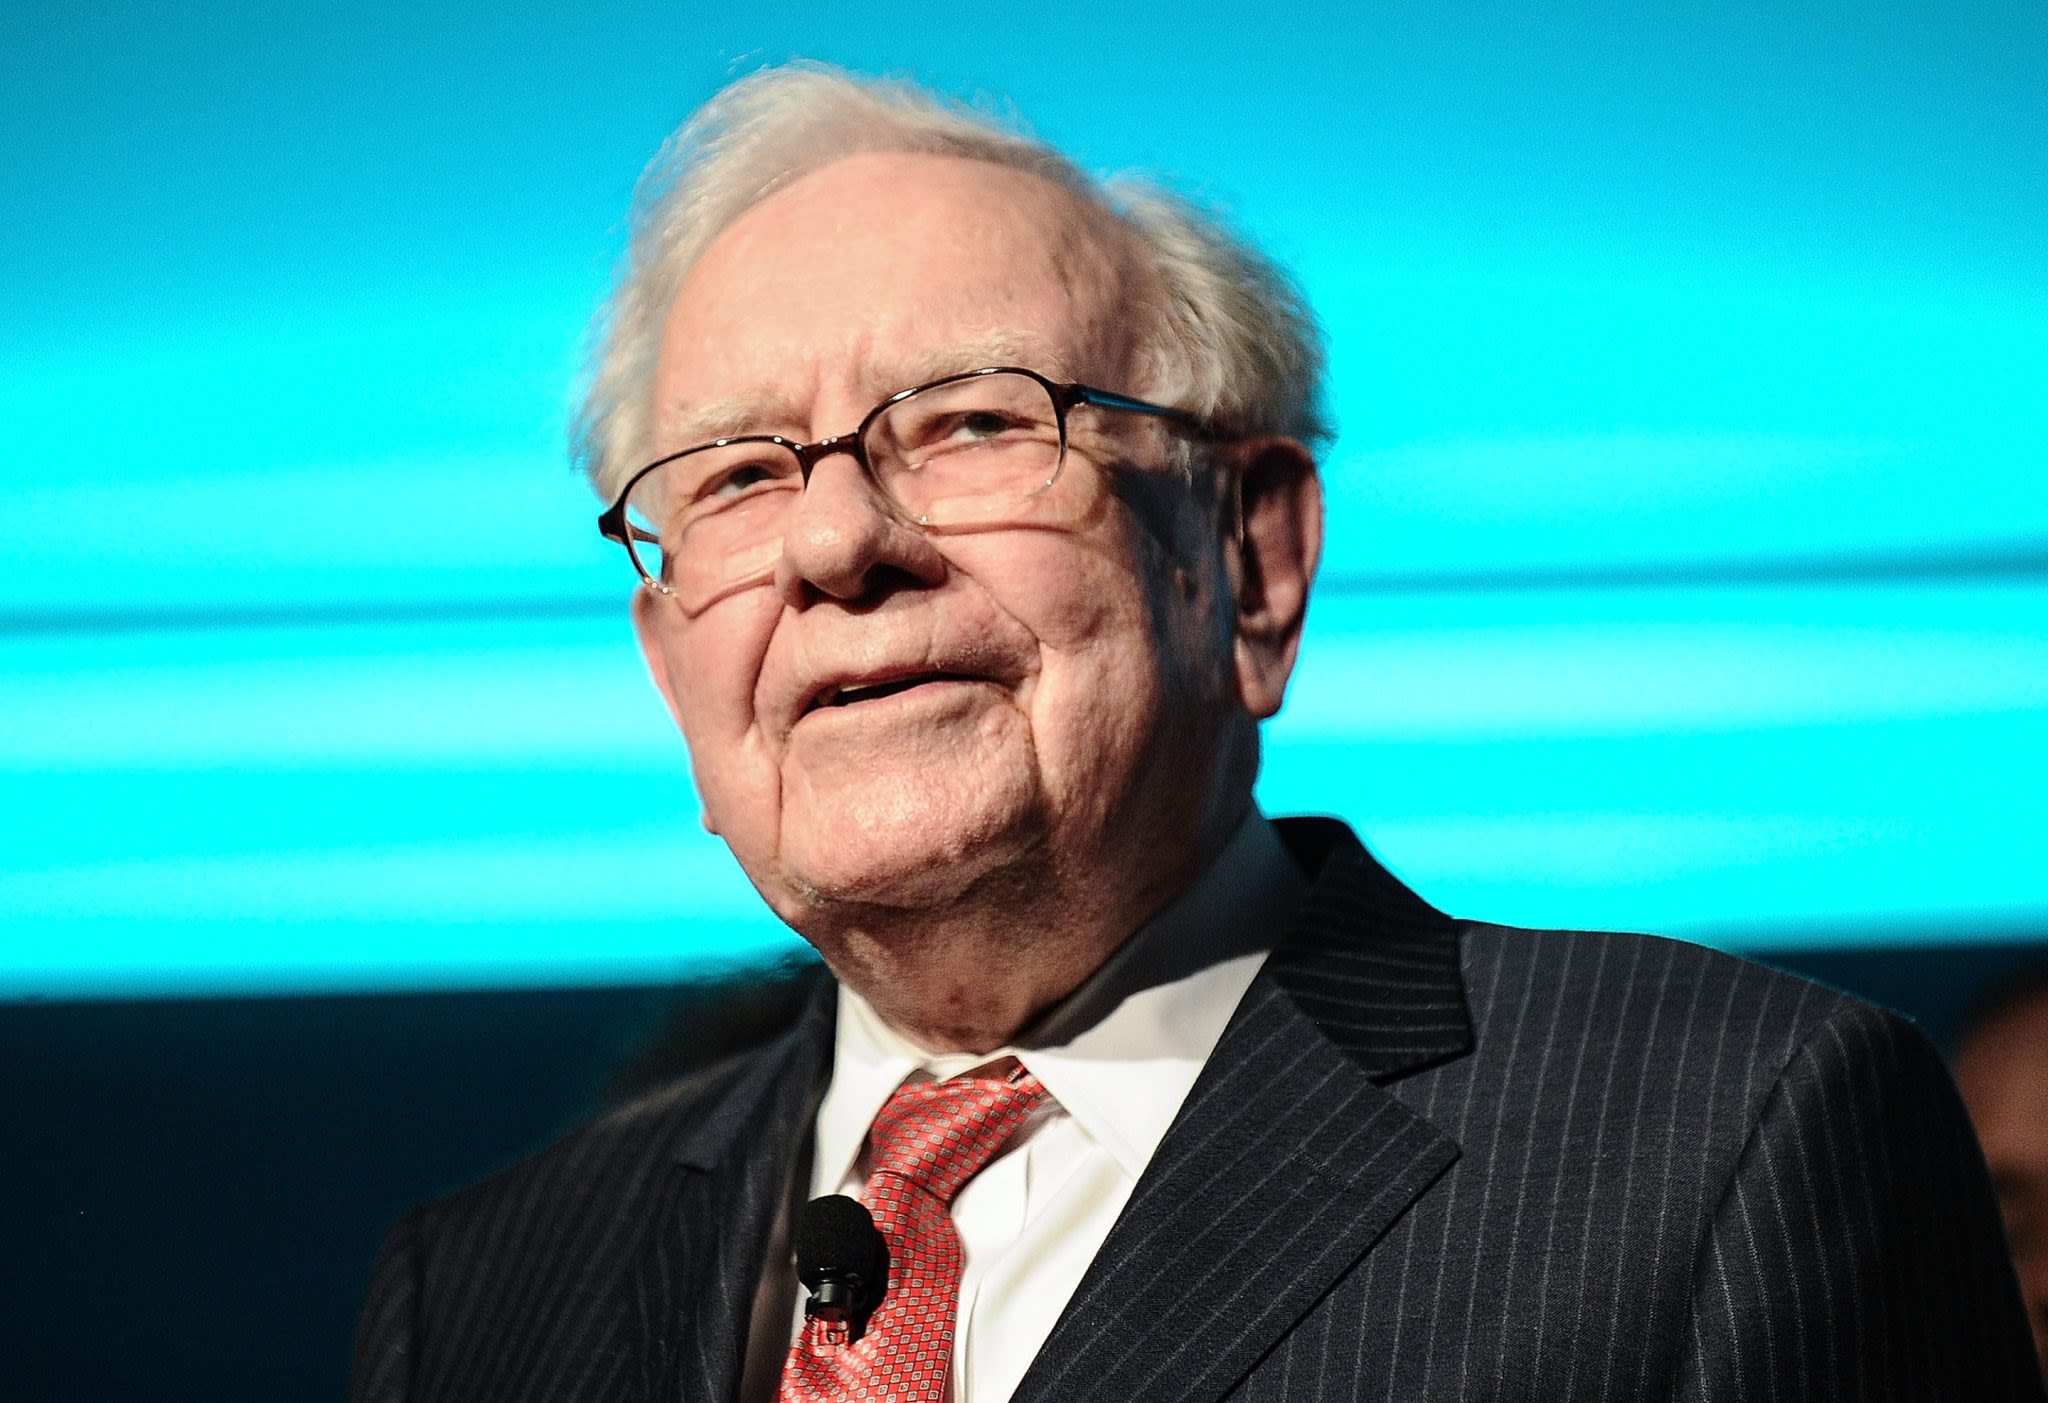 ‘Buffett is more than an investor—he’s a brilliant marketer and leader,’ says tech CFO after his first Berkshire Hathaway meeting